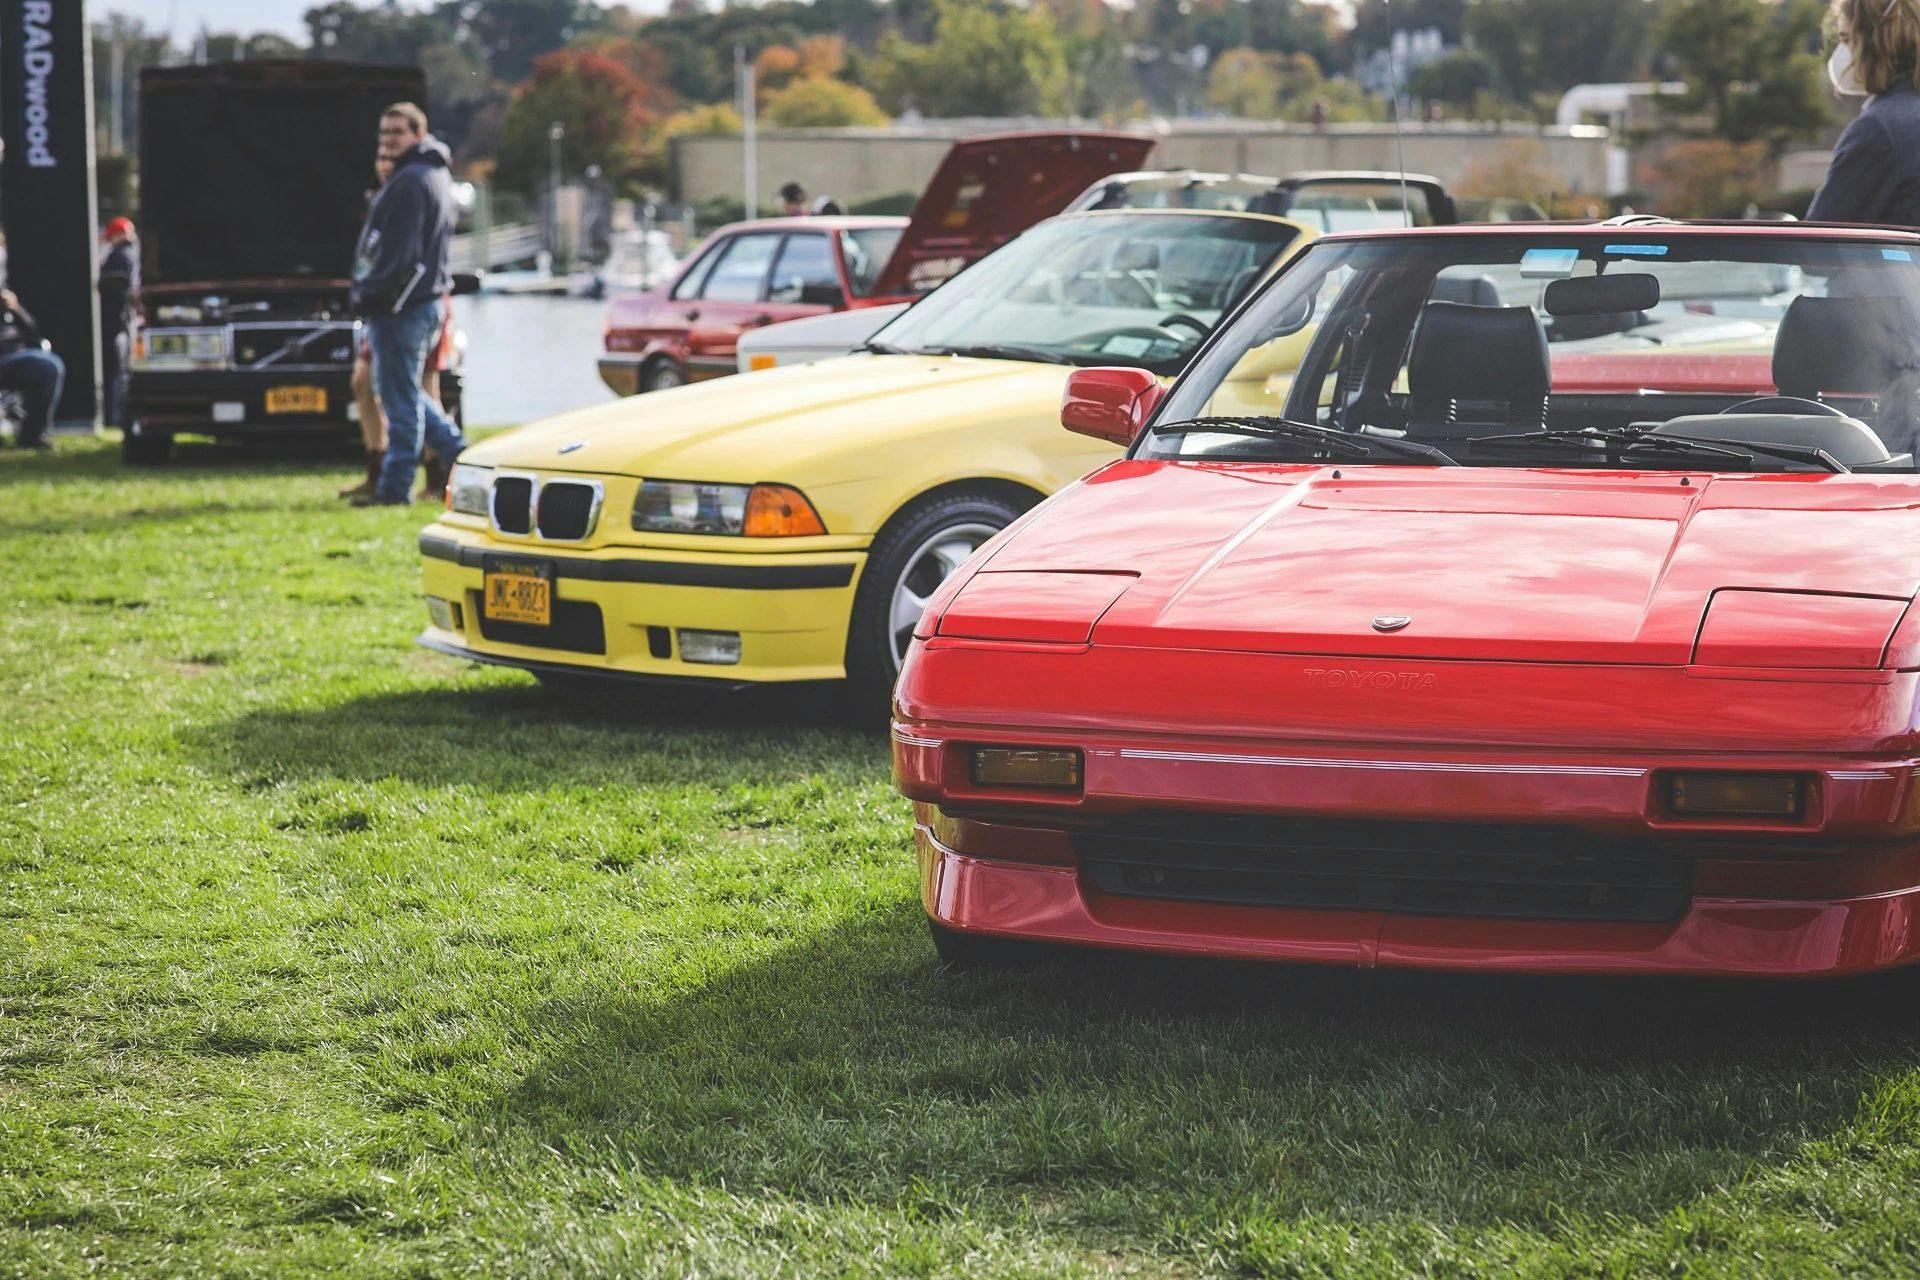 Cars from the 80s and 90s line show field at RADwood event